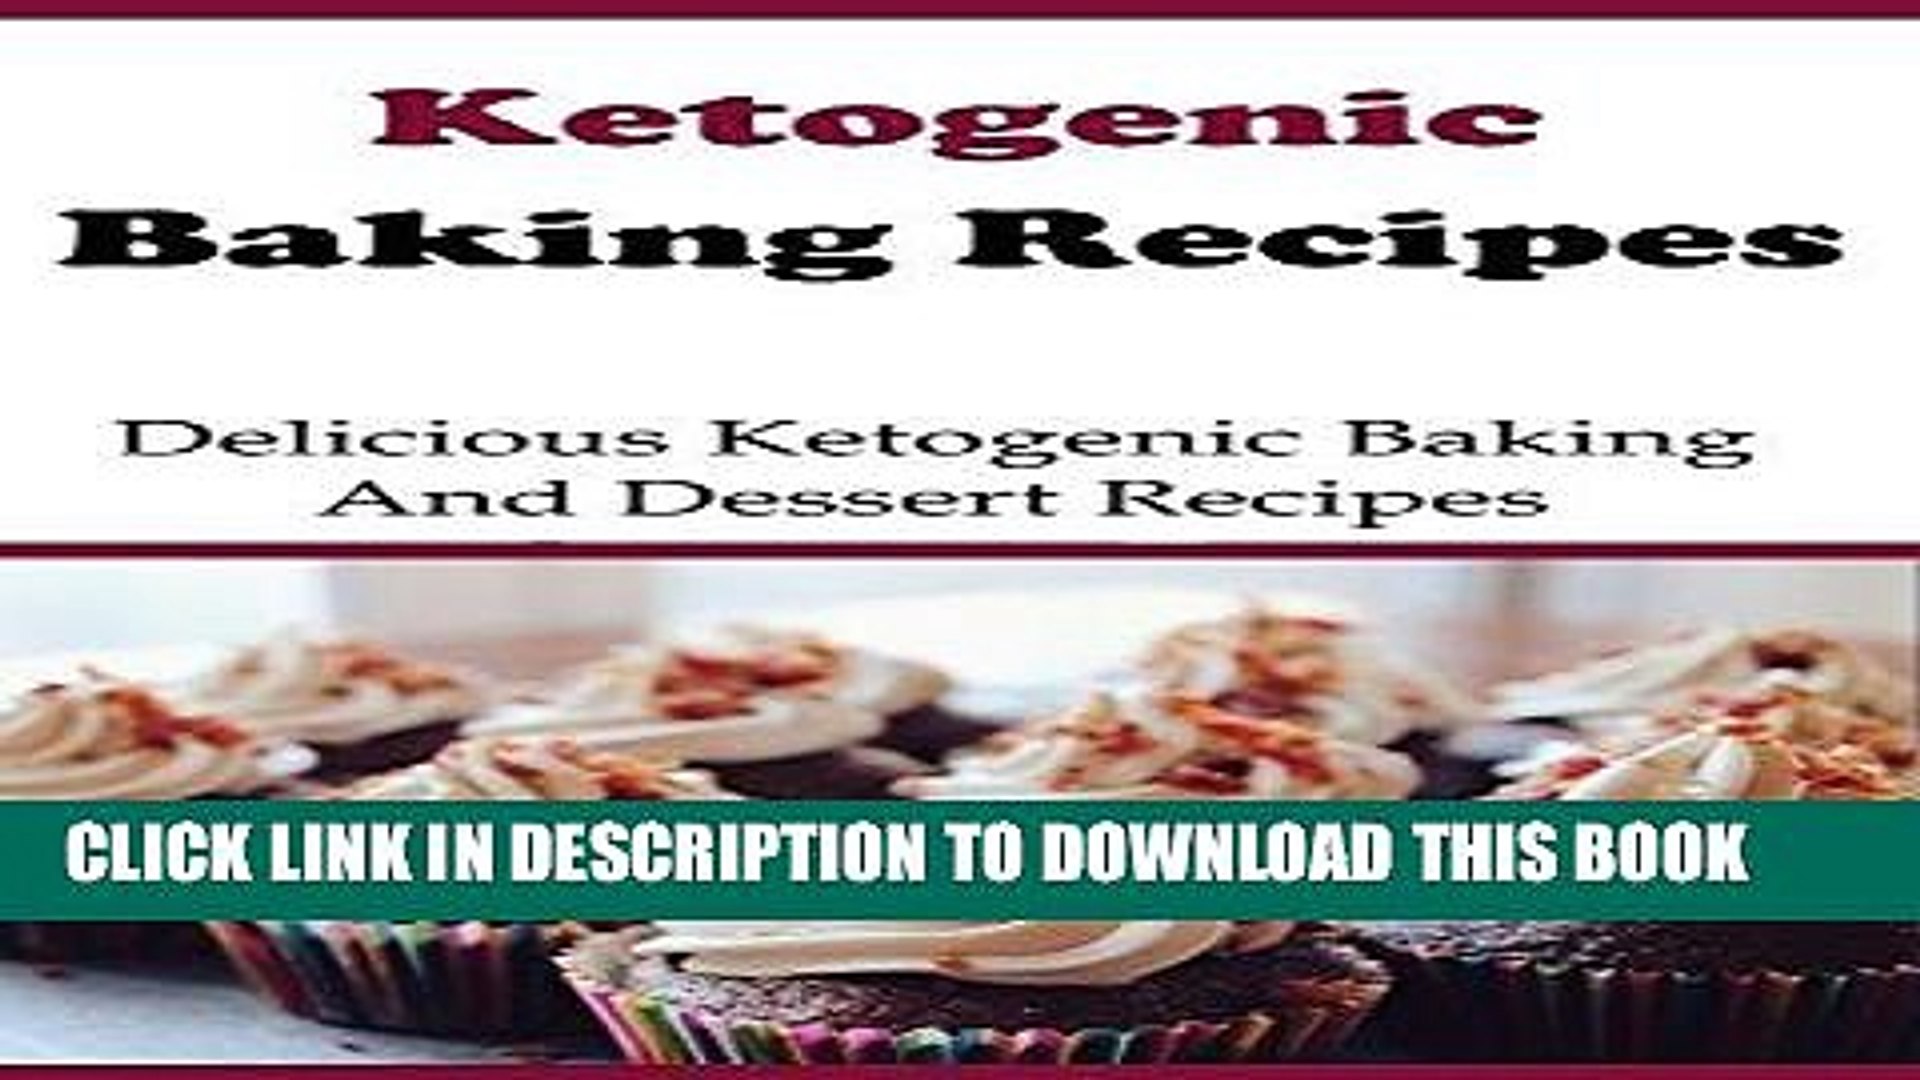 ⁣Best Seller Low Carb Baking Recipes And Dessert Recipes: Delicious Low Carb Baking And Dessert